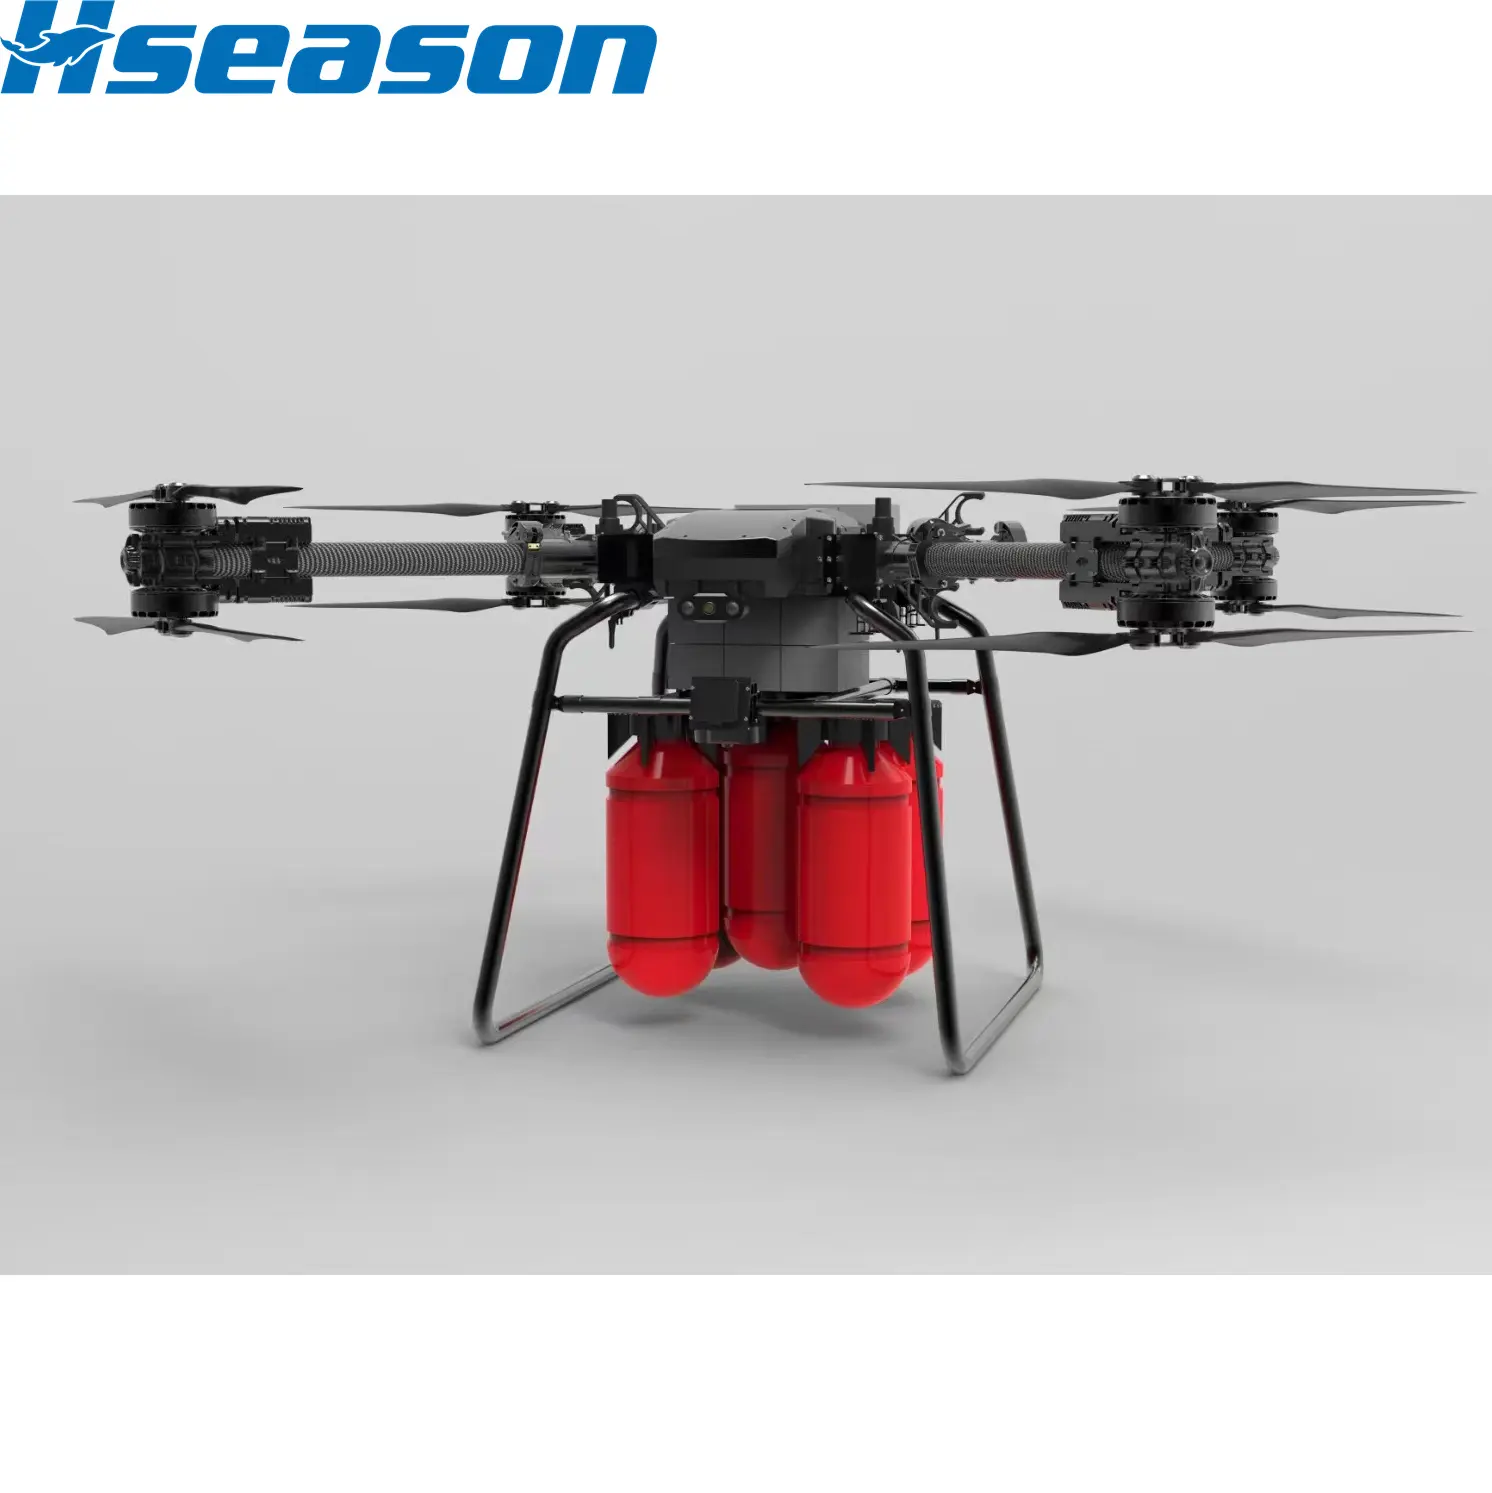 long endurance Large heavy 50kgs payload logistics delivery transportation drone Frame for Logistics and Fire Fighting